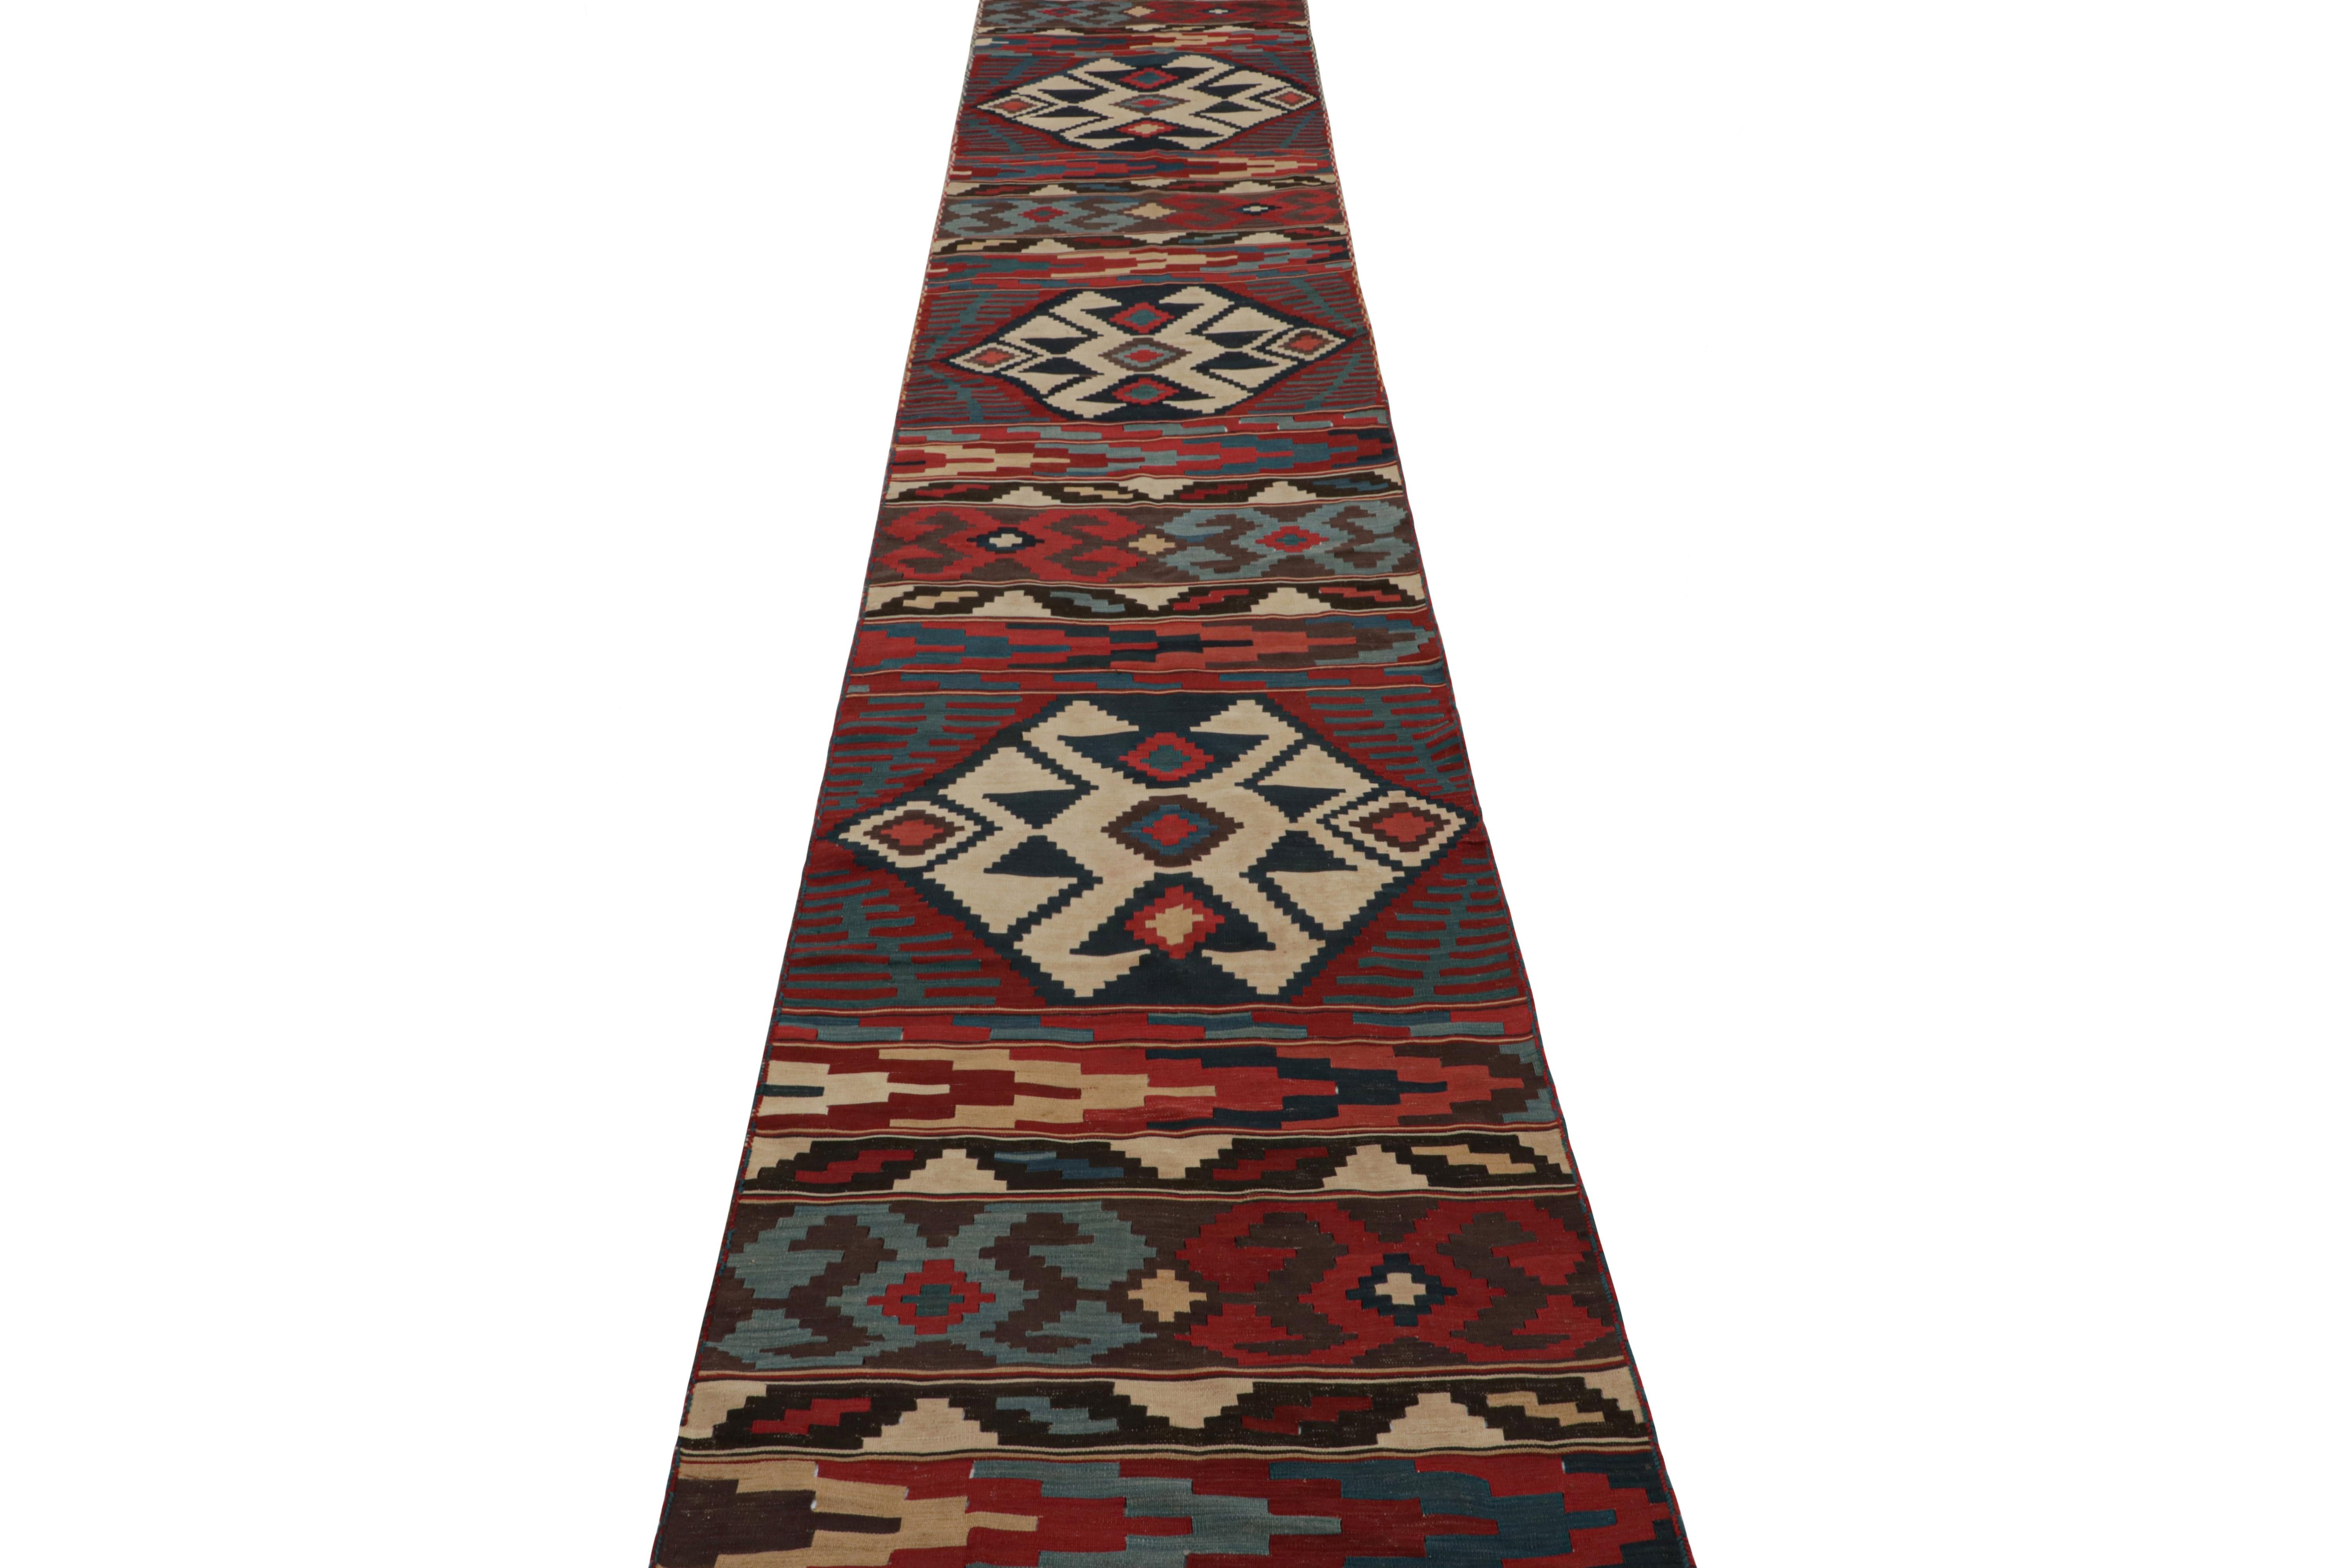 Tribal Twin Vintage Persian Kilim Runner Rugs with Geometric Patterns For Sale